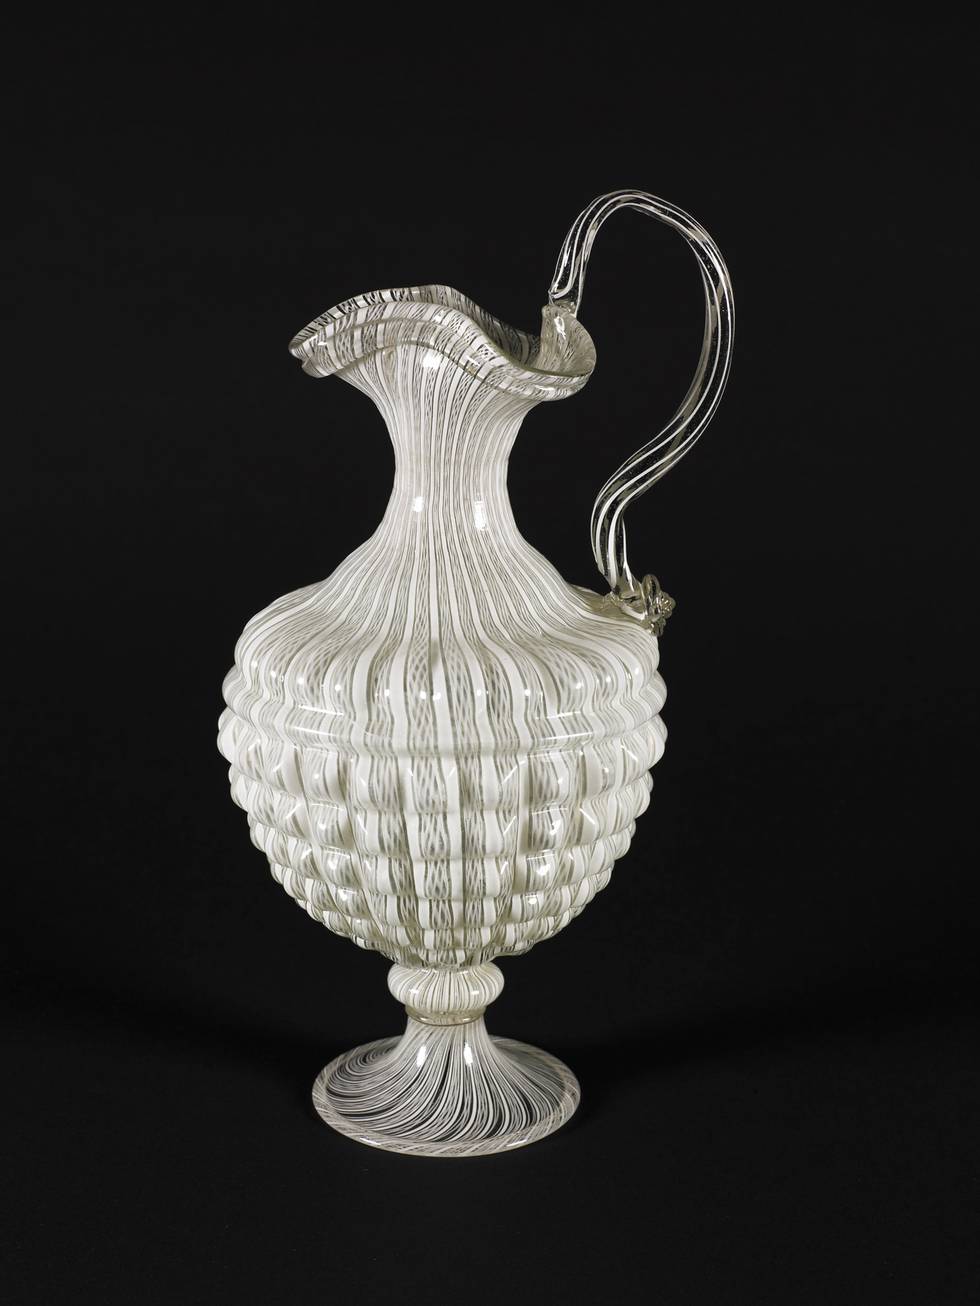 Photograph of a white patterned Venetian glass vessel